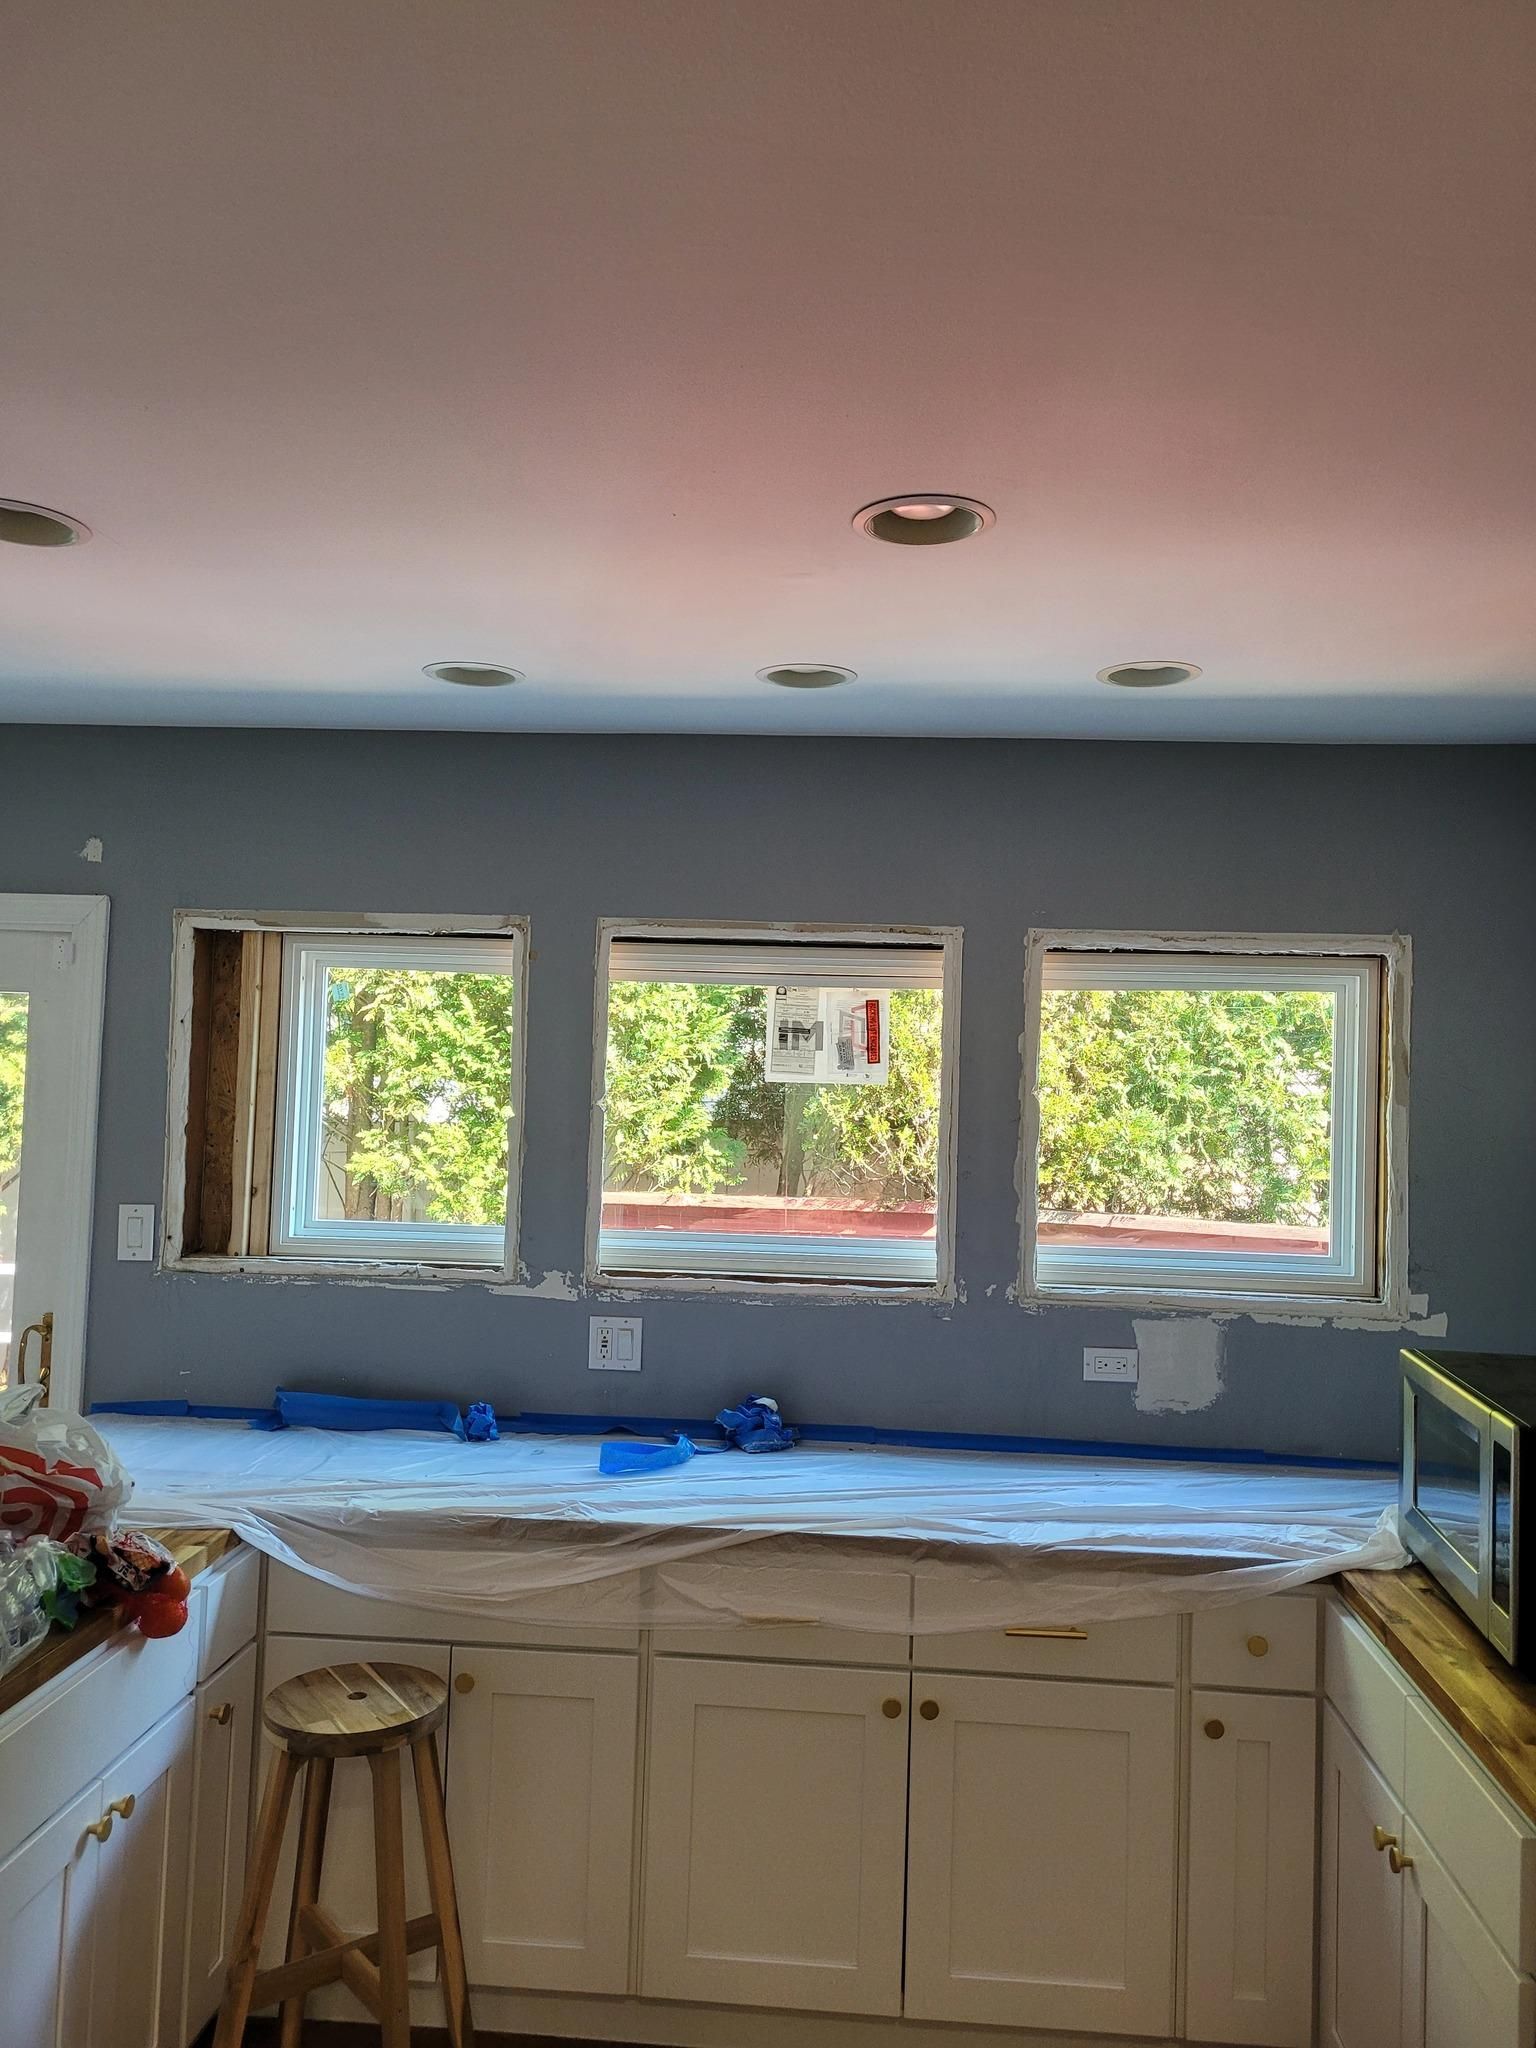 All Photos for Go-at Remodeling & Painting in Northbrook,  IL